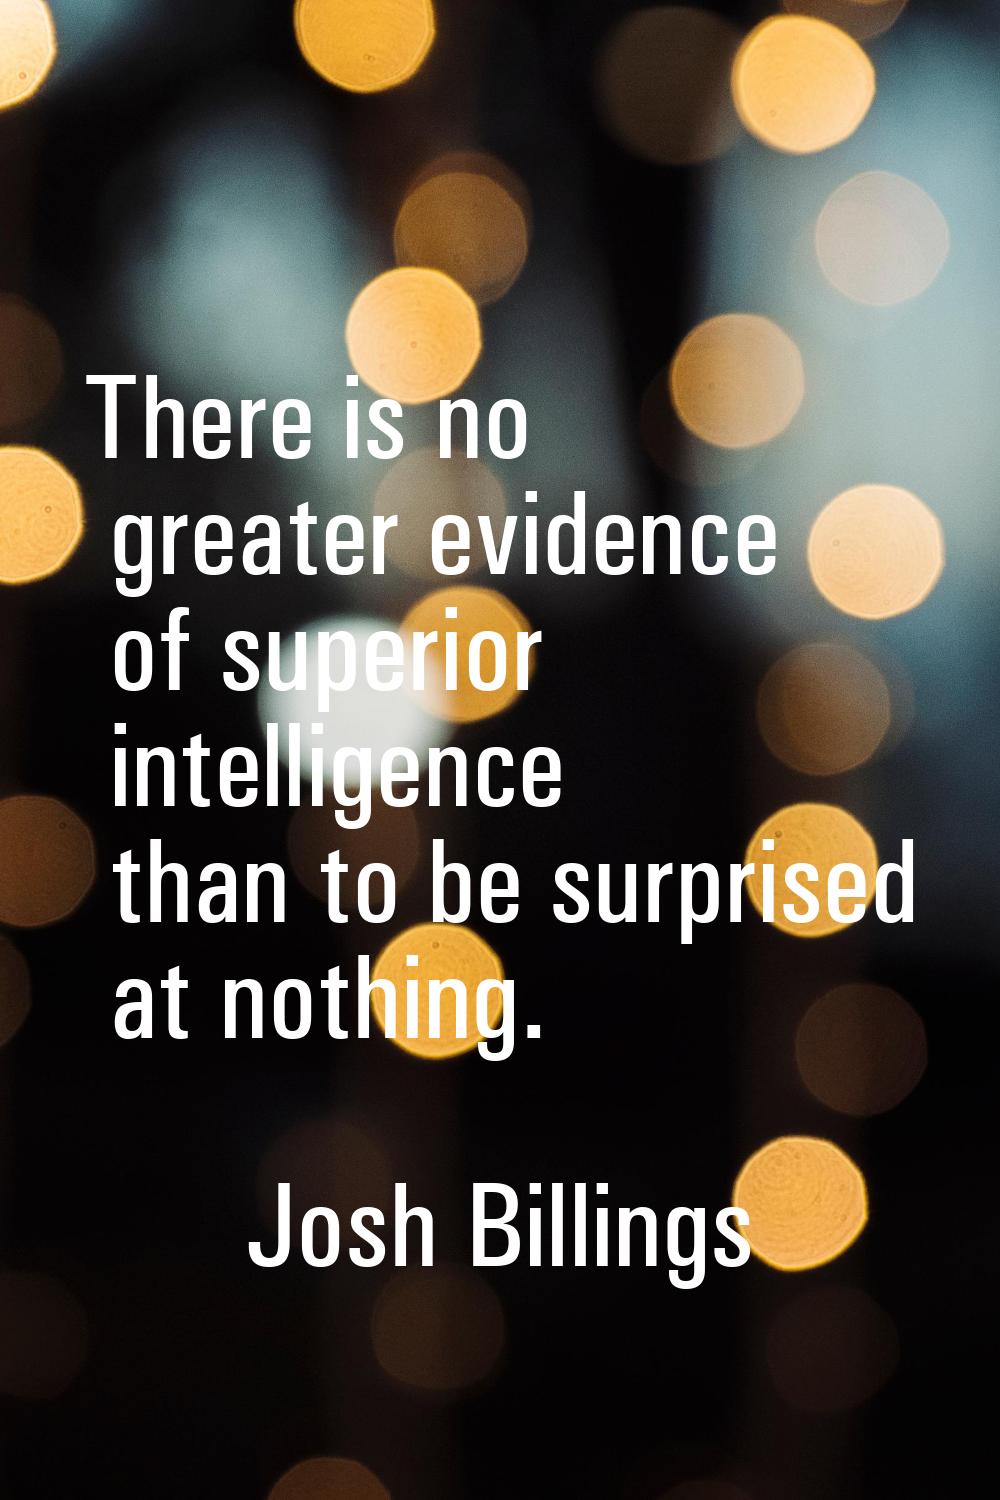 There is no greater evidence of superior intelligence than to be surprised at nothing.